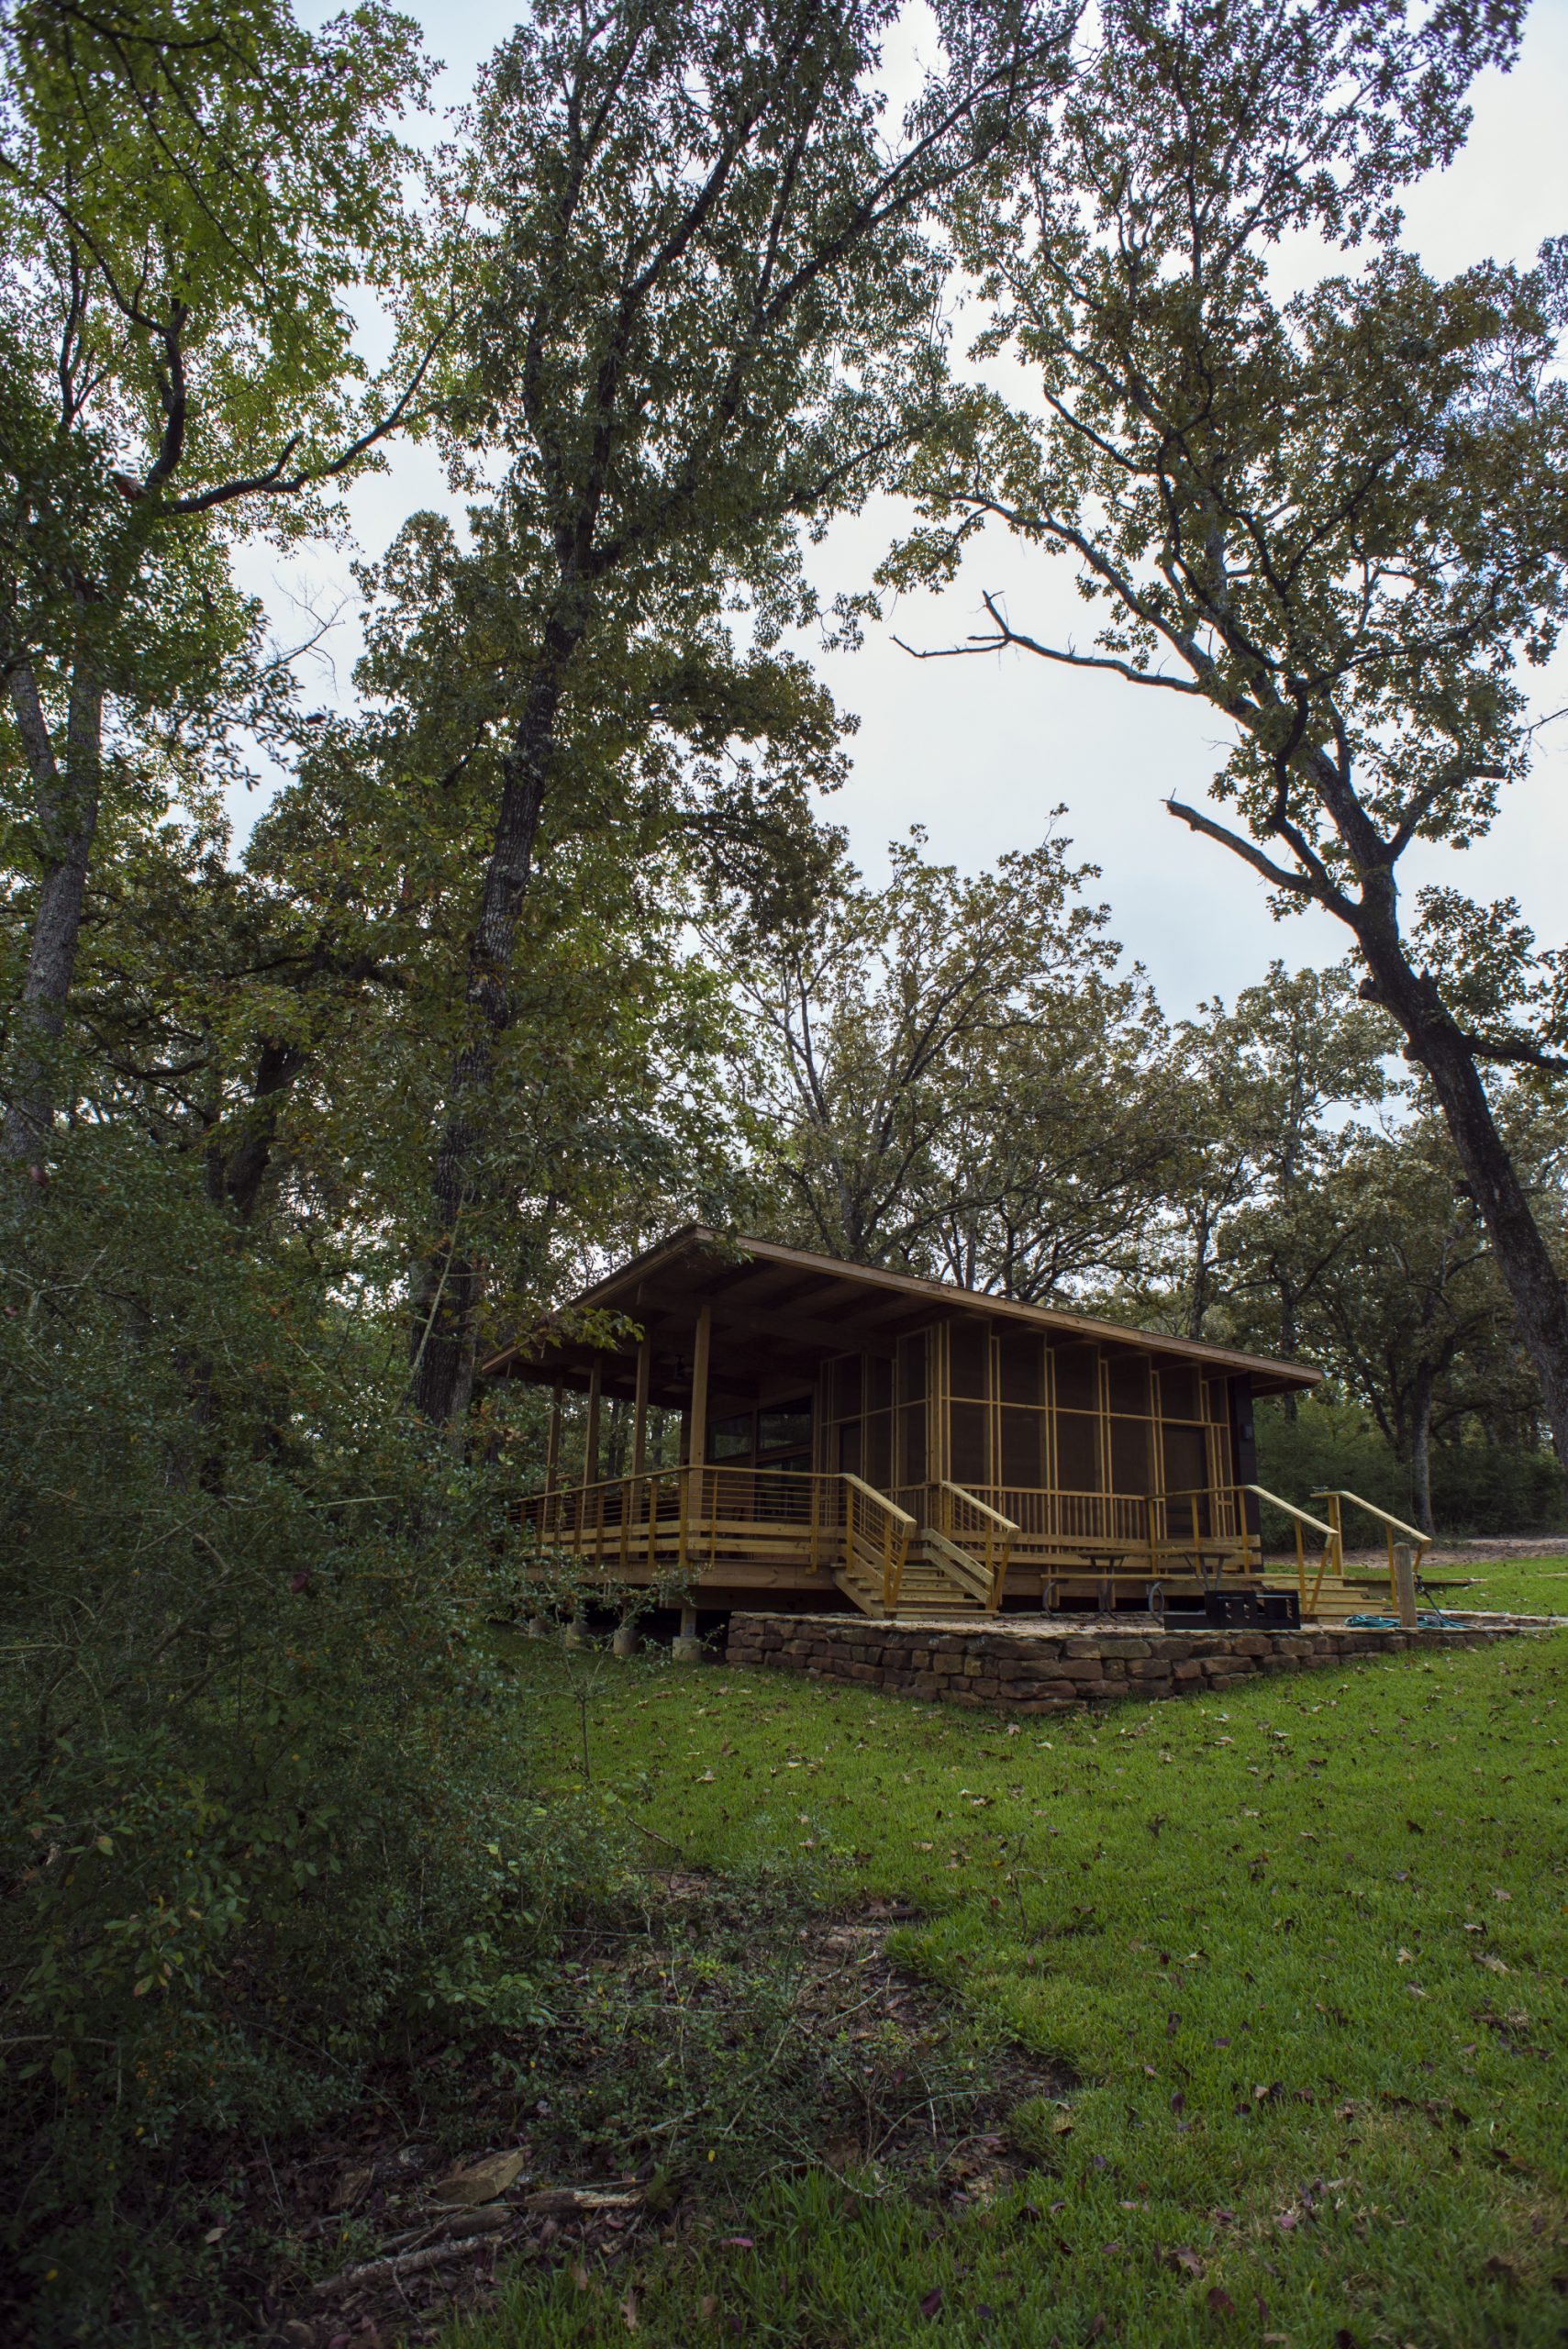 A cabin sits among the trees and greenery of Fort Boggy State Park